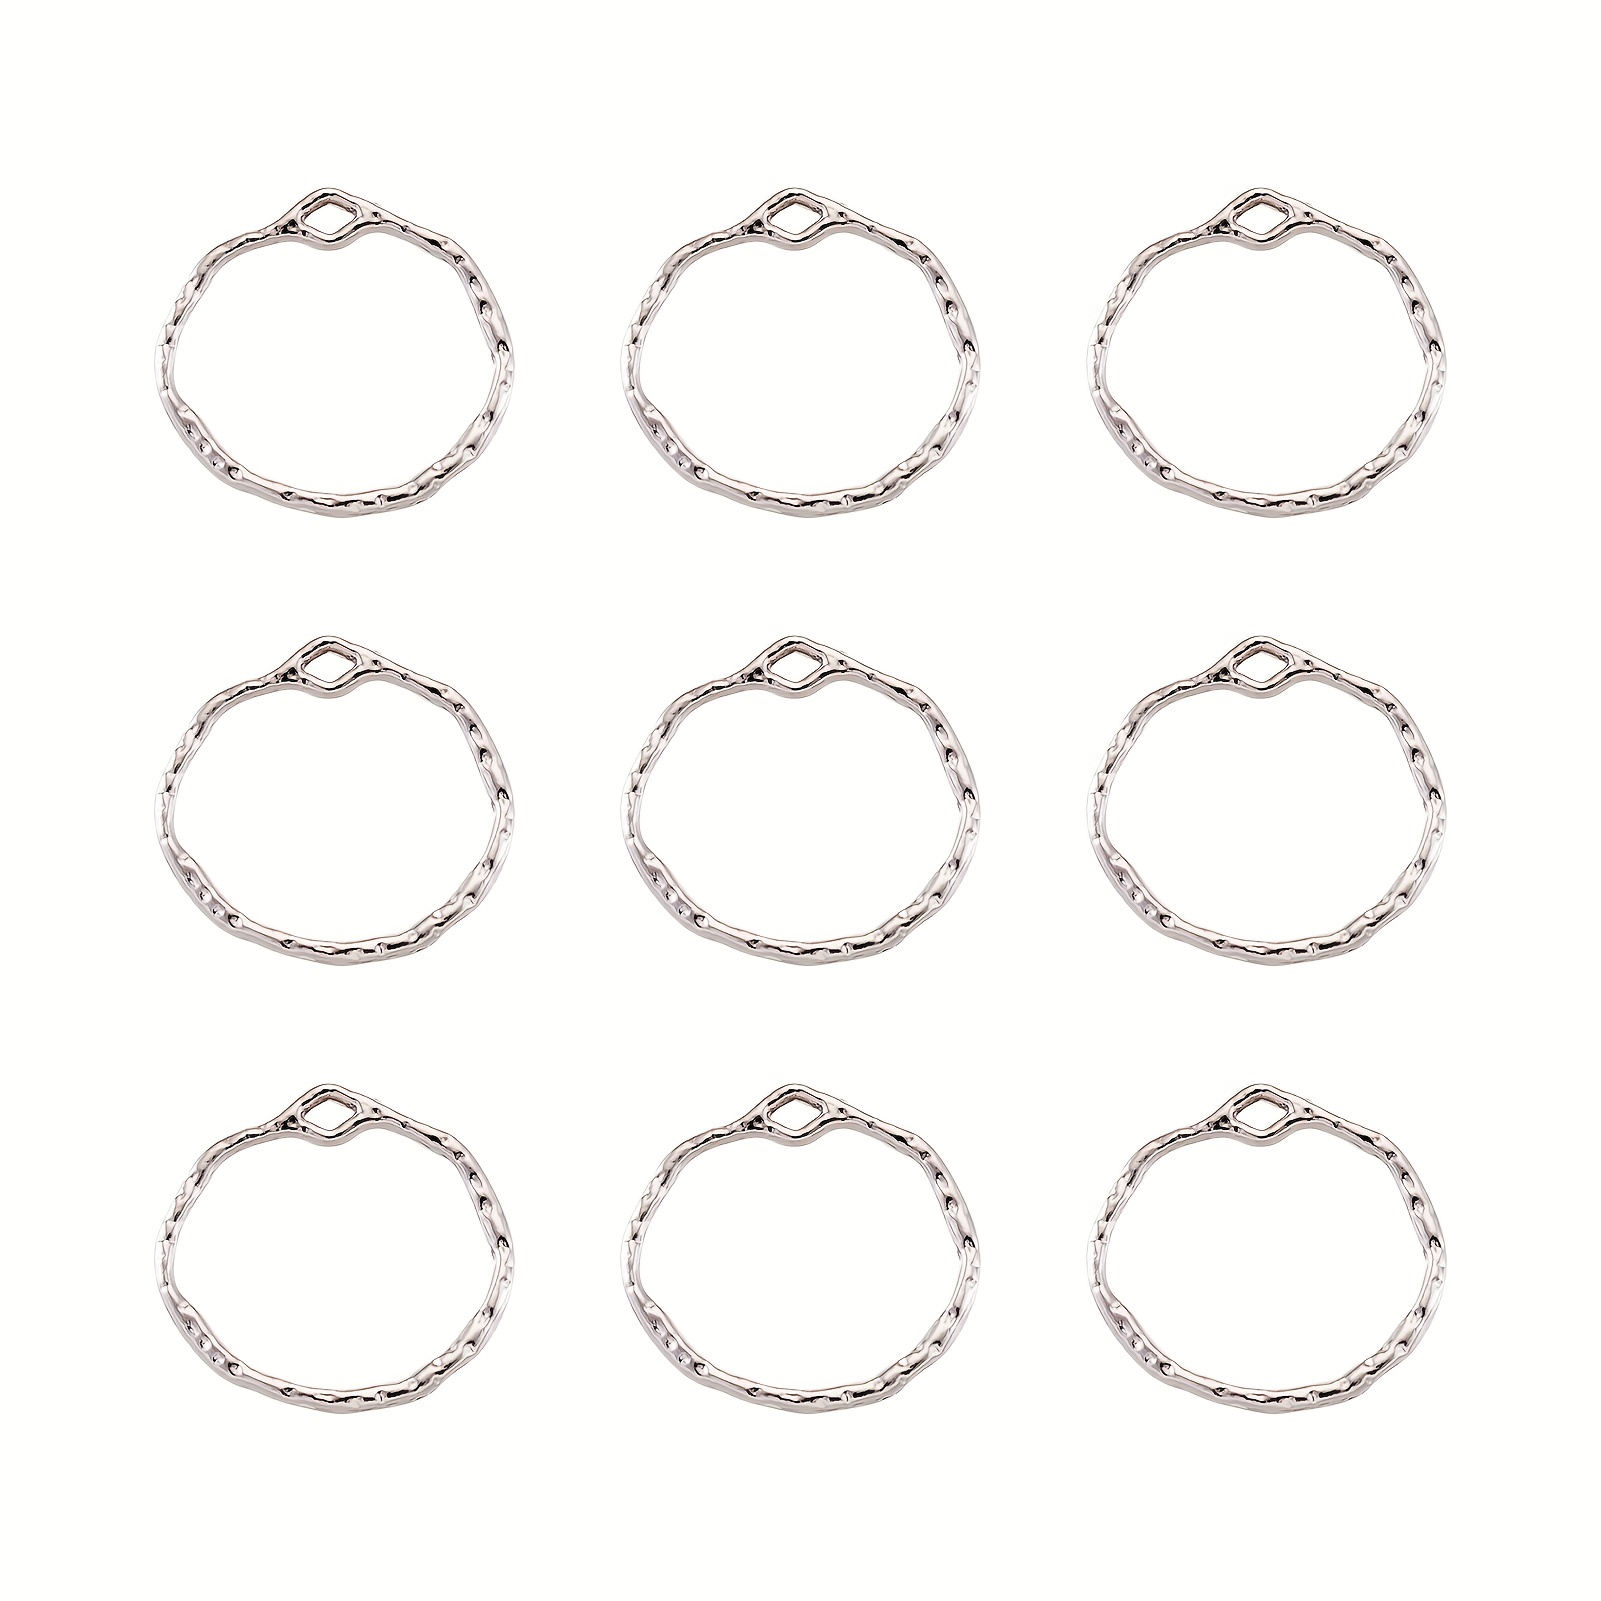 Zerodis 925 Sterling Silver Jewelry Making DIY Open Bezels Hollow Frame  Pendant Resin Craft Bezels Jewelry Making Supplies Accessory 